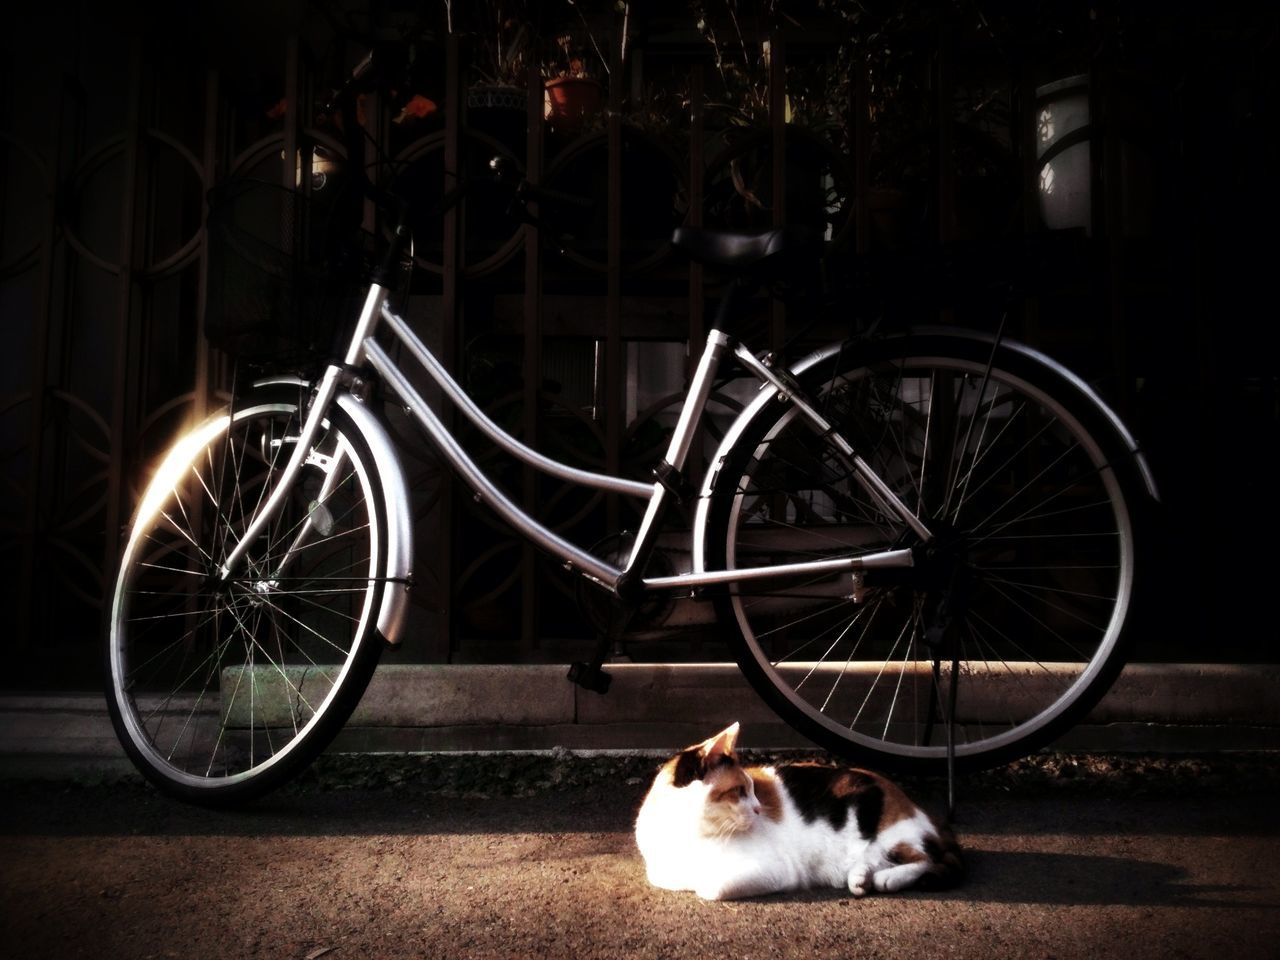 domestic animals, pets, animal themes, domestic cat, one animal, mammal, cat, bicycle, transportation, feline, land vehicle, mode of transport, street, night, stationary, side view, parking, outdoors, no people, sitting